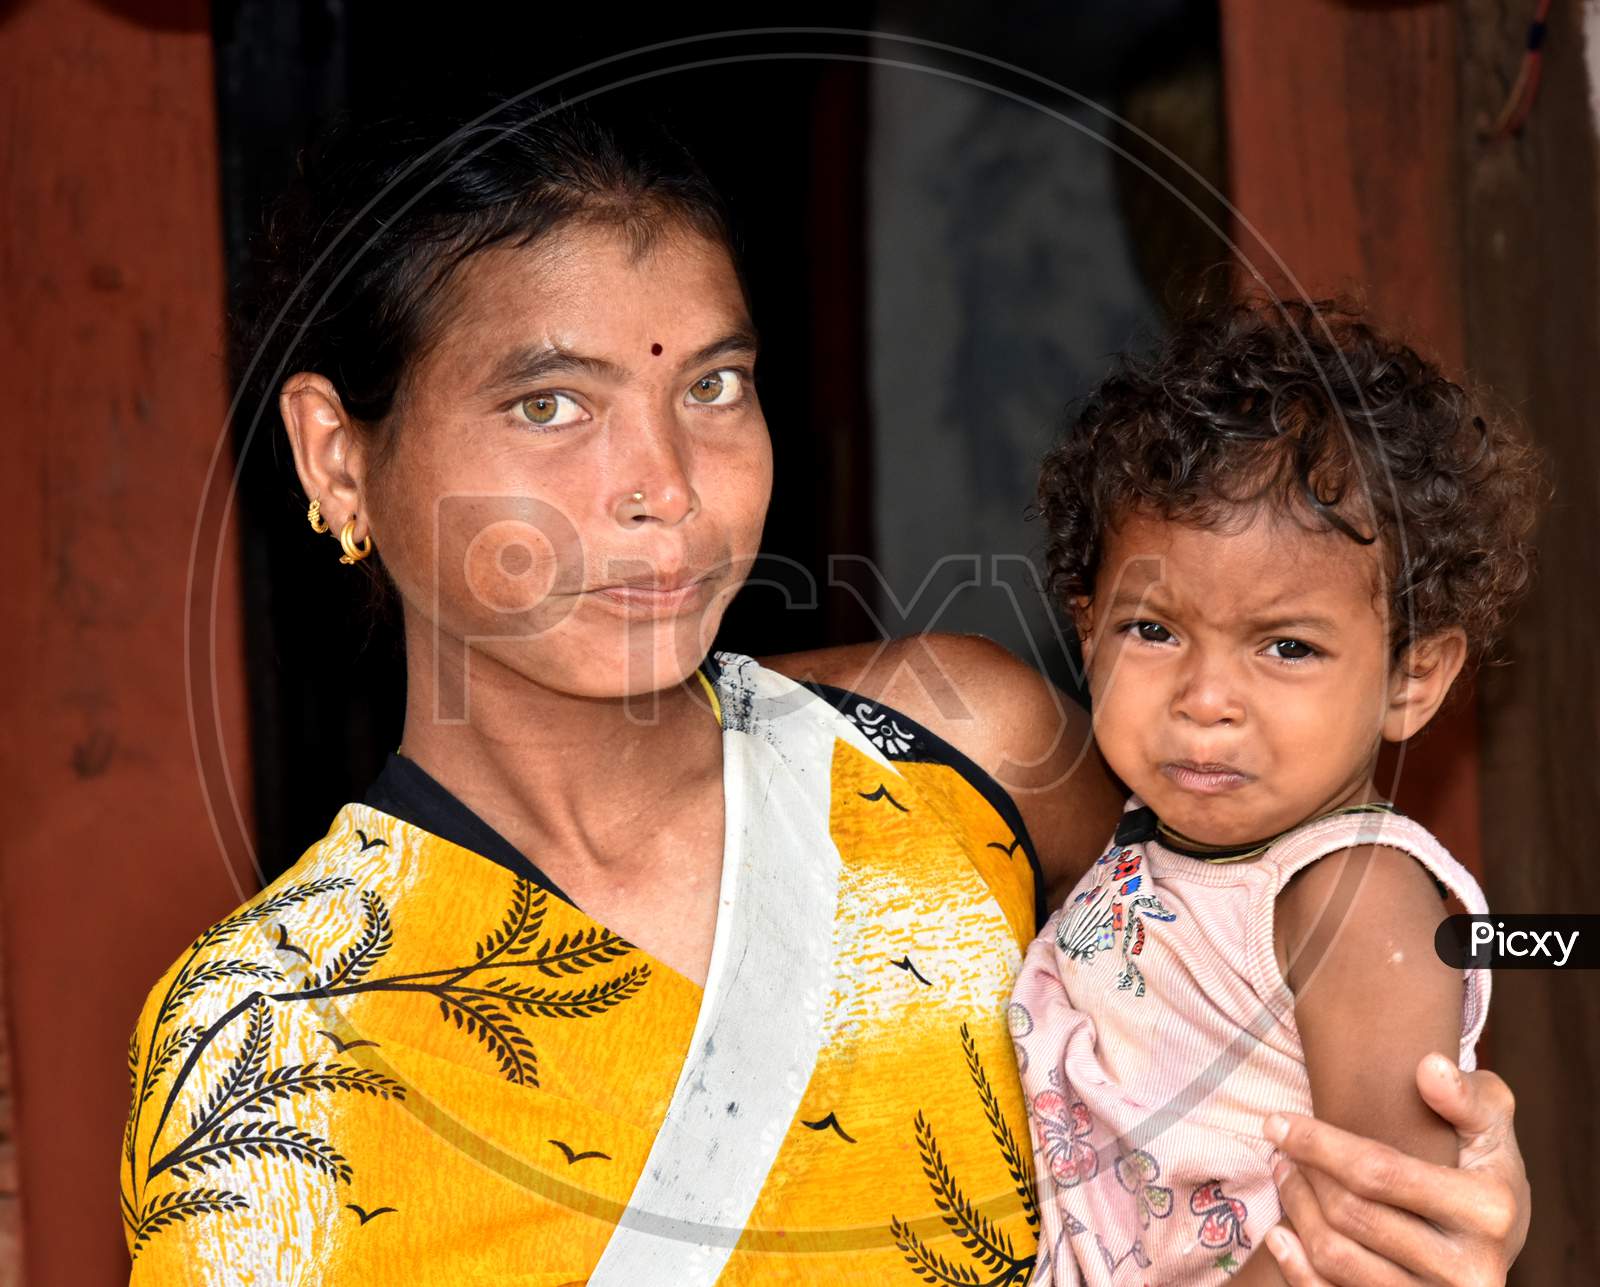 Portrait Of Indian Mother With Her Child in an Rural Village